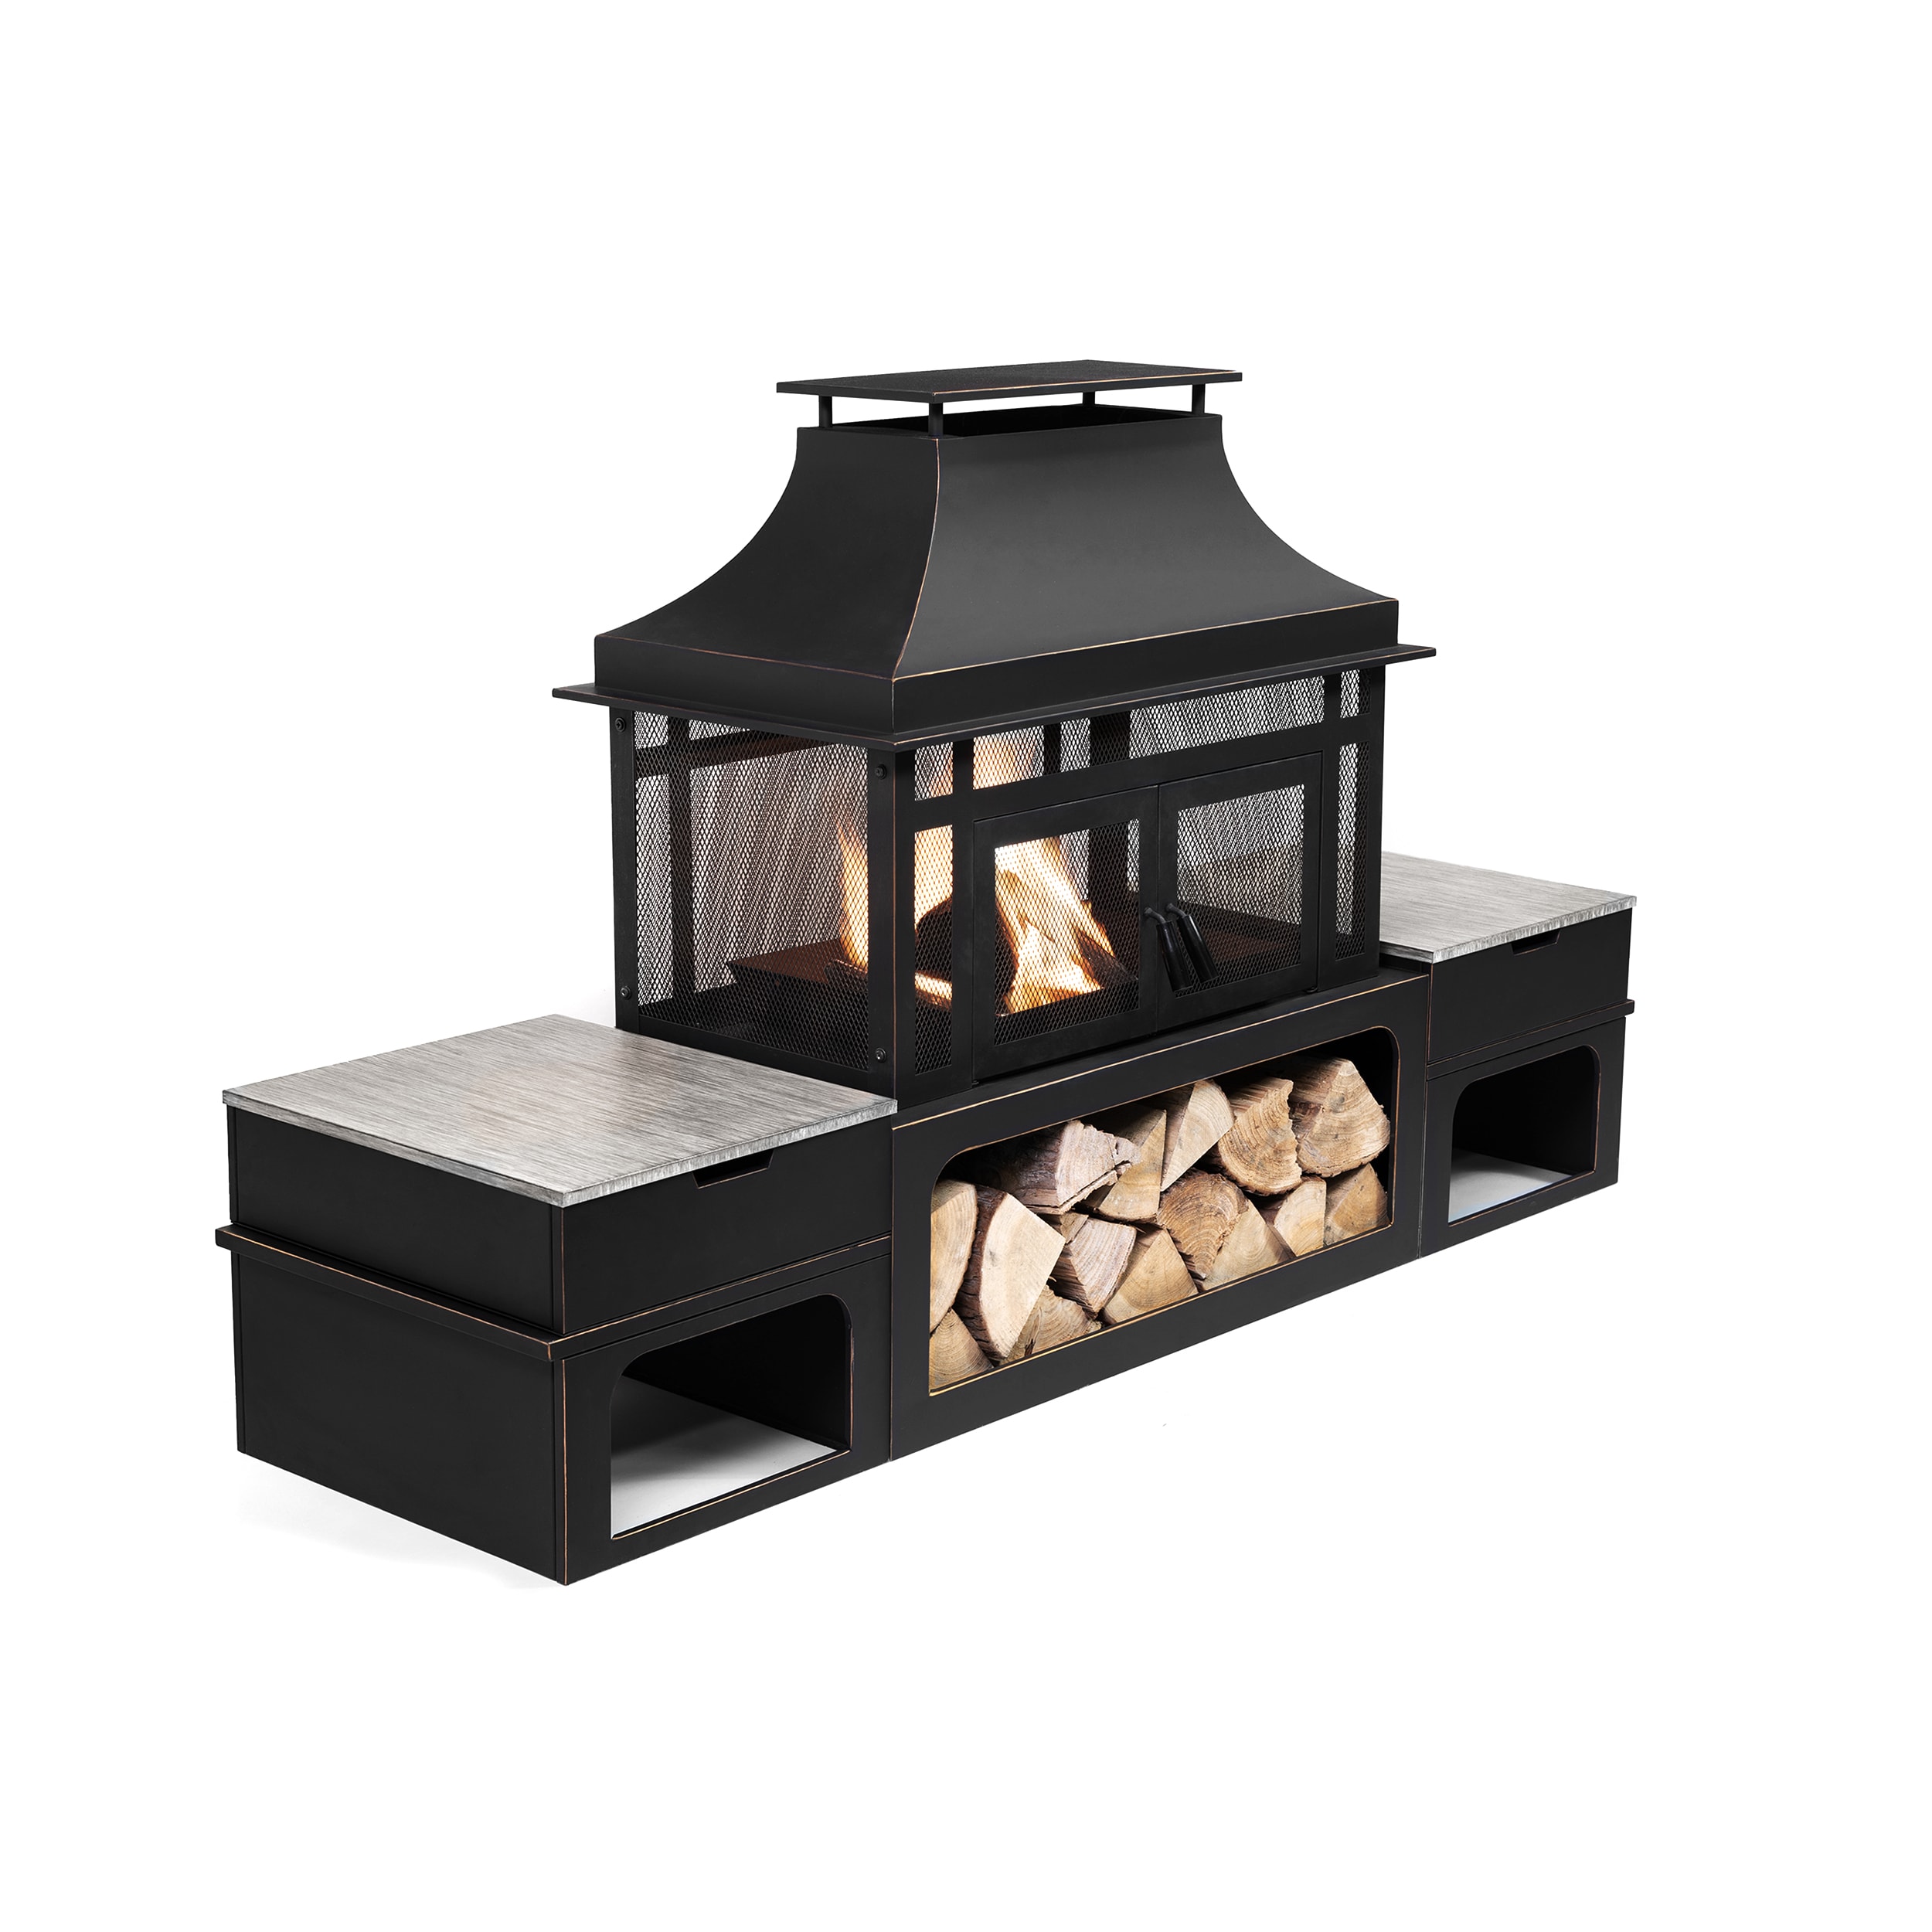 Wood-Burning Pit Fire the at W Deko Living Black Steel Pits Wood-Burning 79.37-in department in Rustic Fire